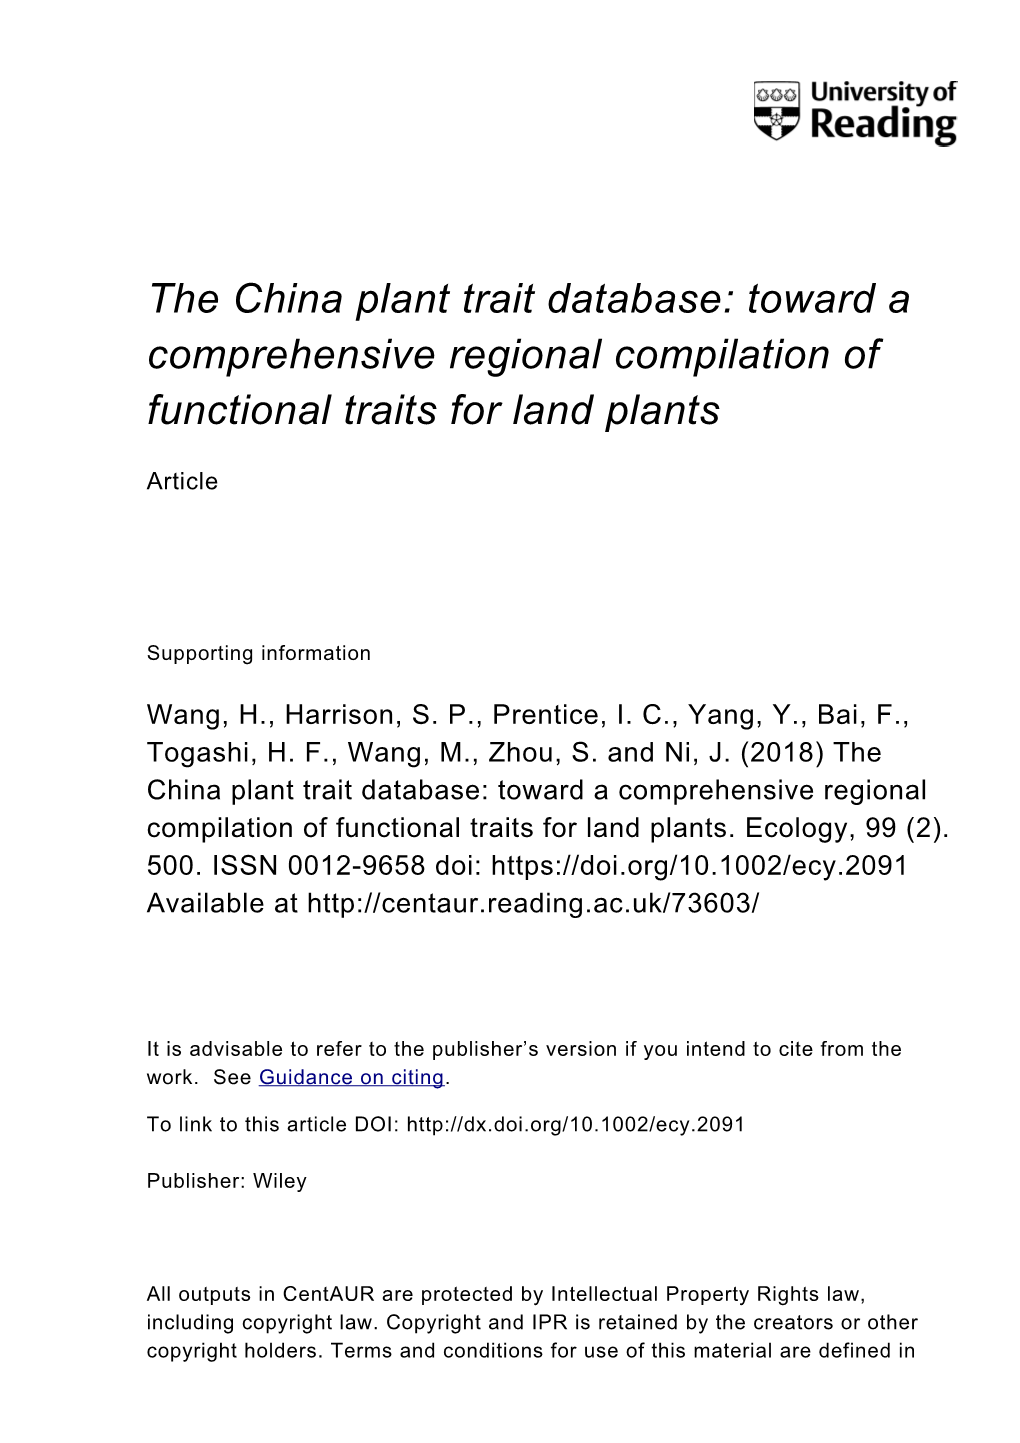 The China Plant Trait Database: Toward a Comprehensive Regional Compilation of Functional Traits for Land Plants